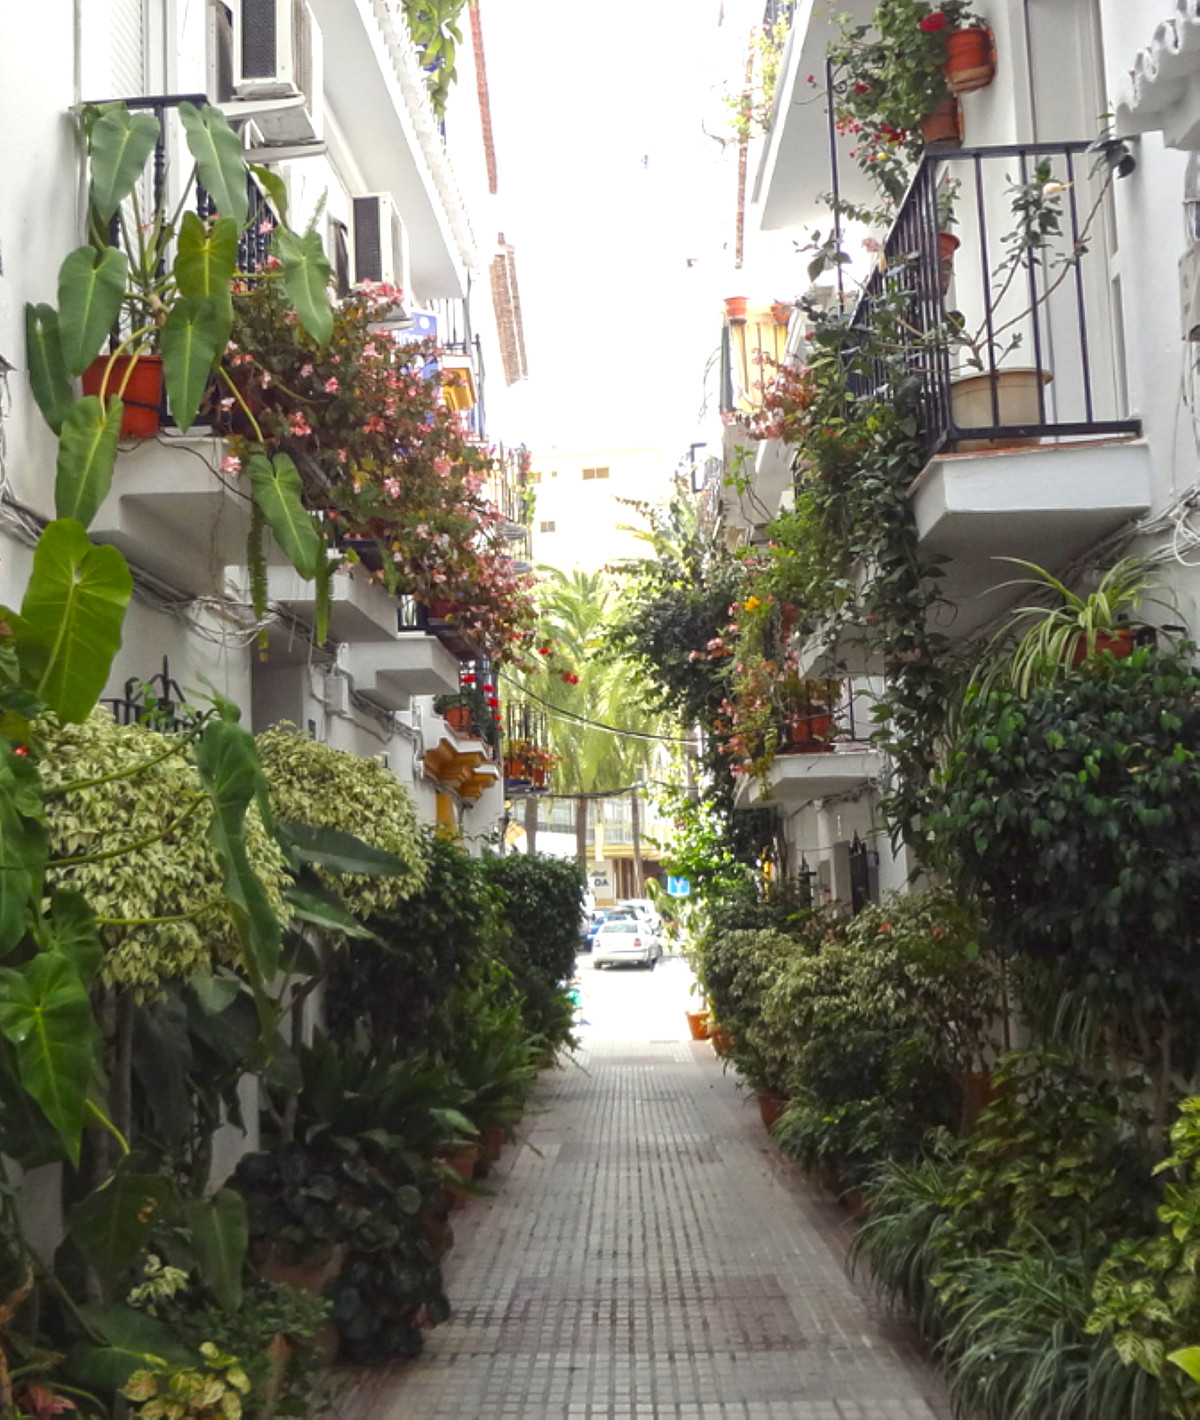 OFF MARKET UNTIL OCTOBER 2022
A nice Guesthouse in the old town of Marbella only 3 minutes walking t, Spain